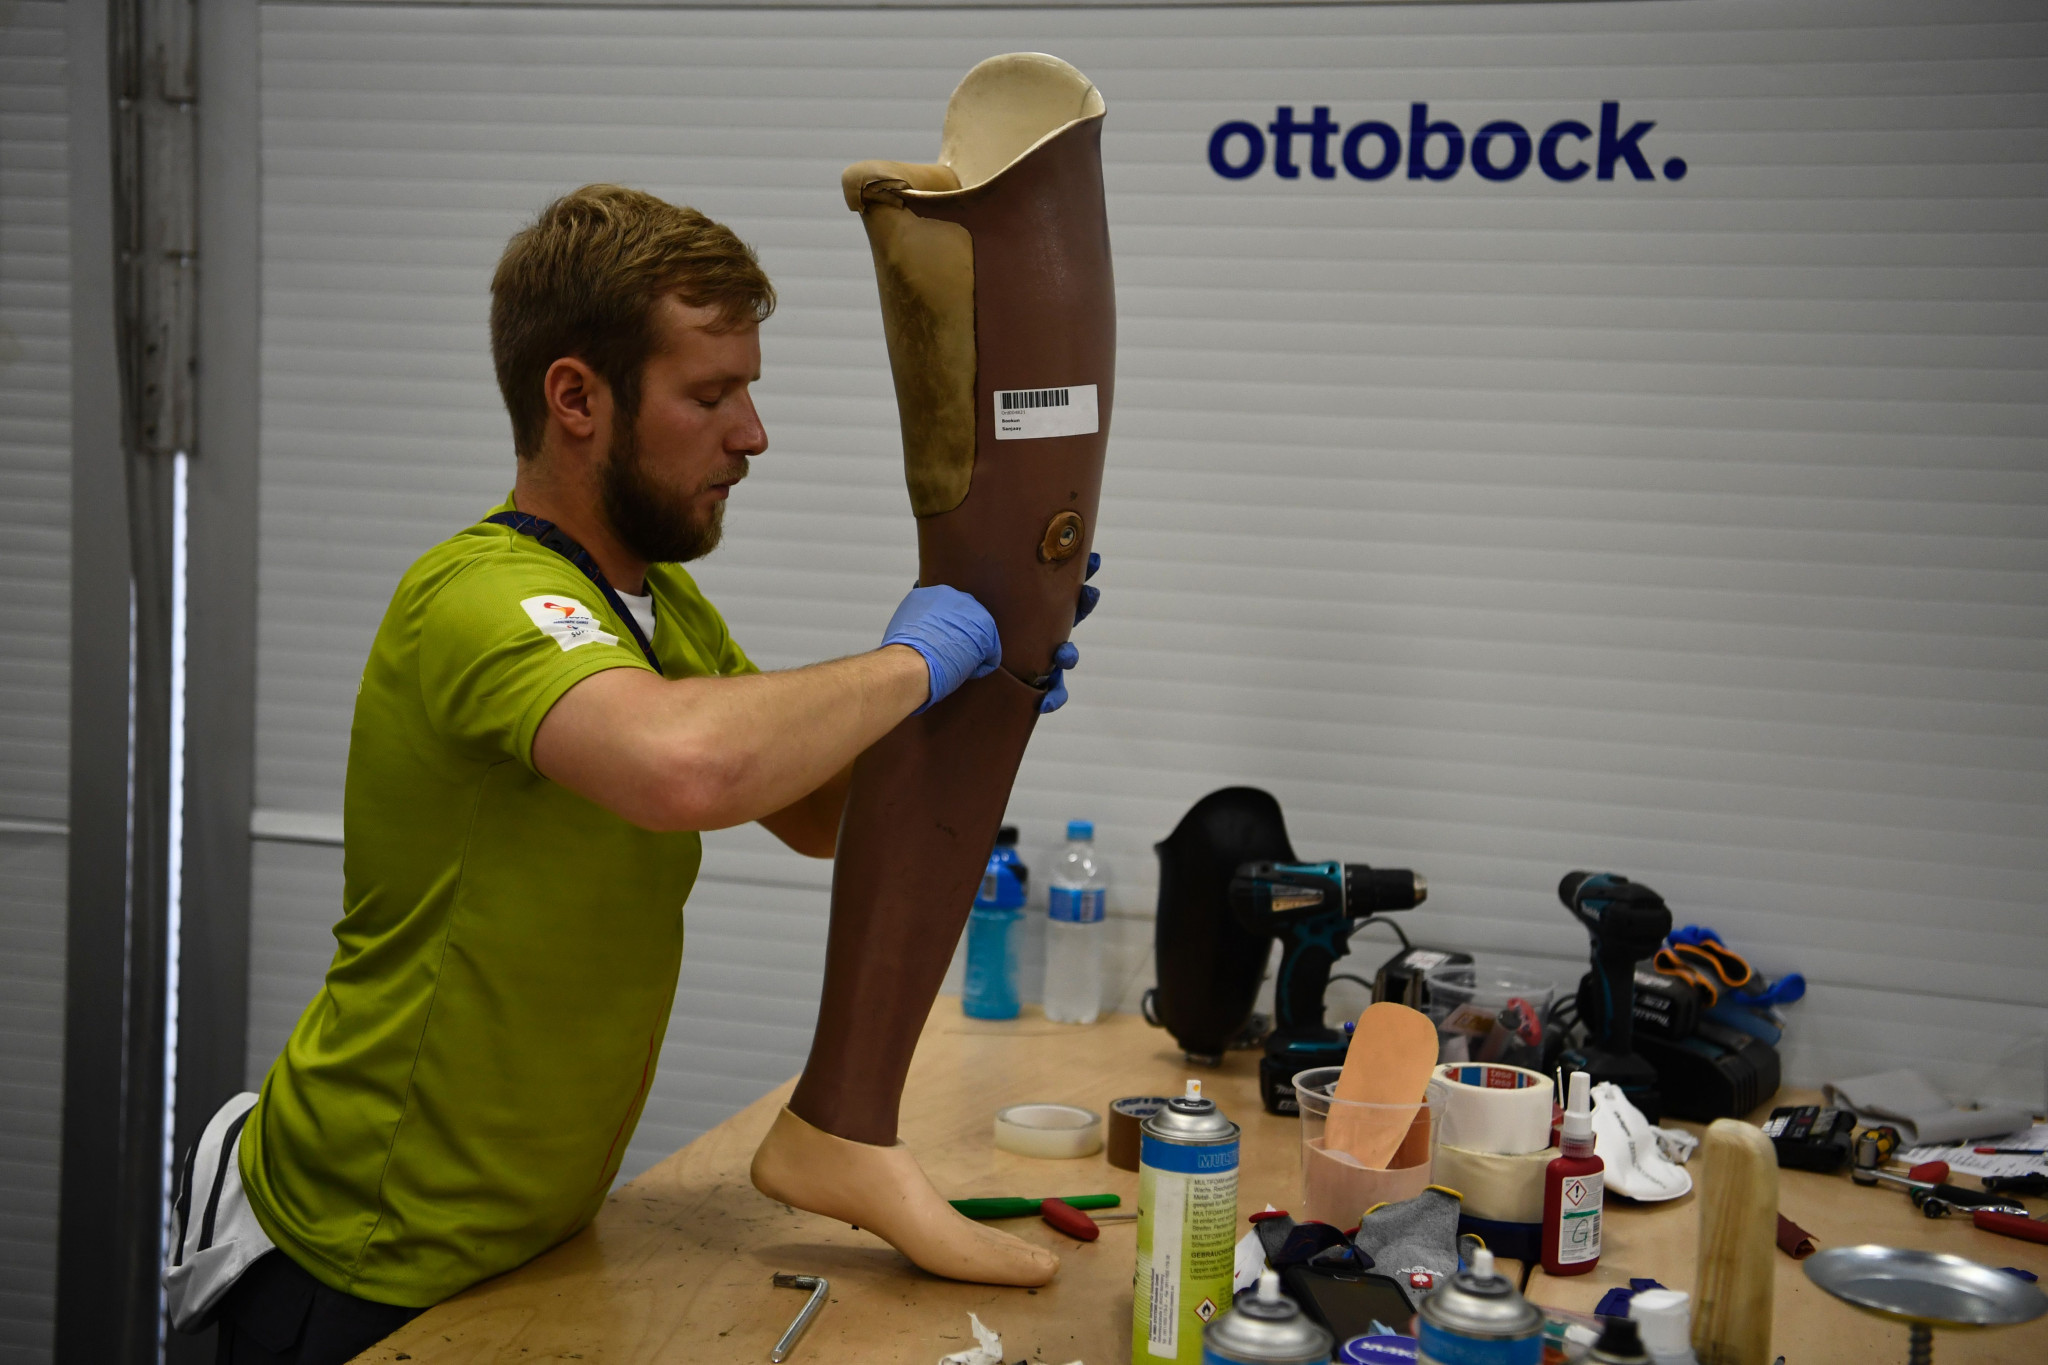 Ottobock have provided technicians to make repairs at previous Paralympic Games ©Getty Images